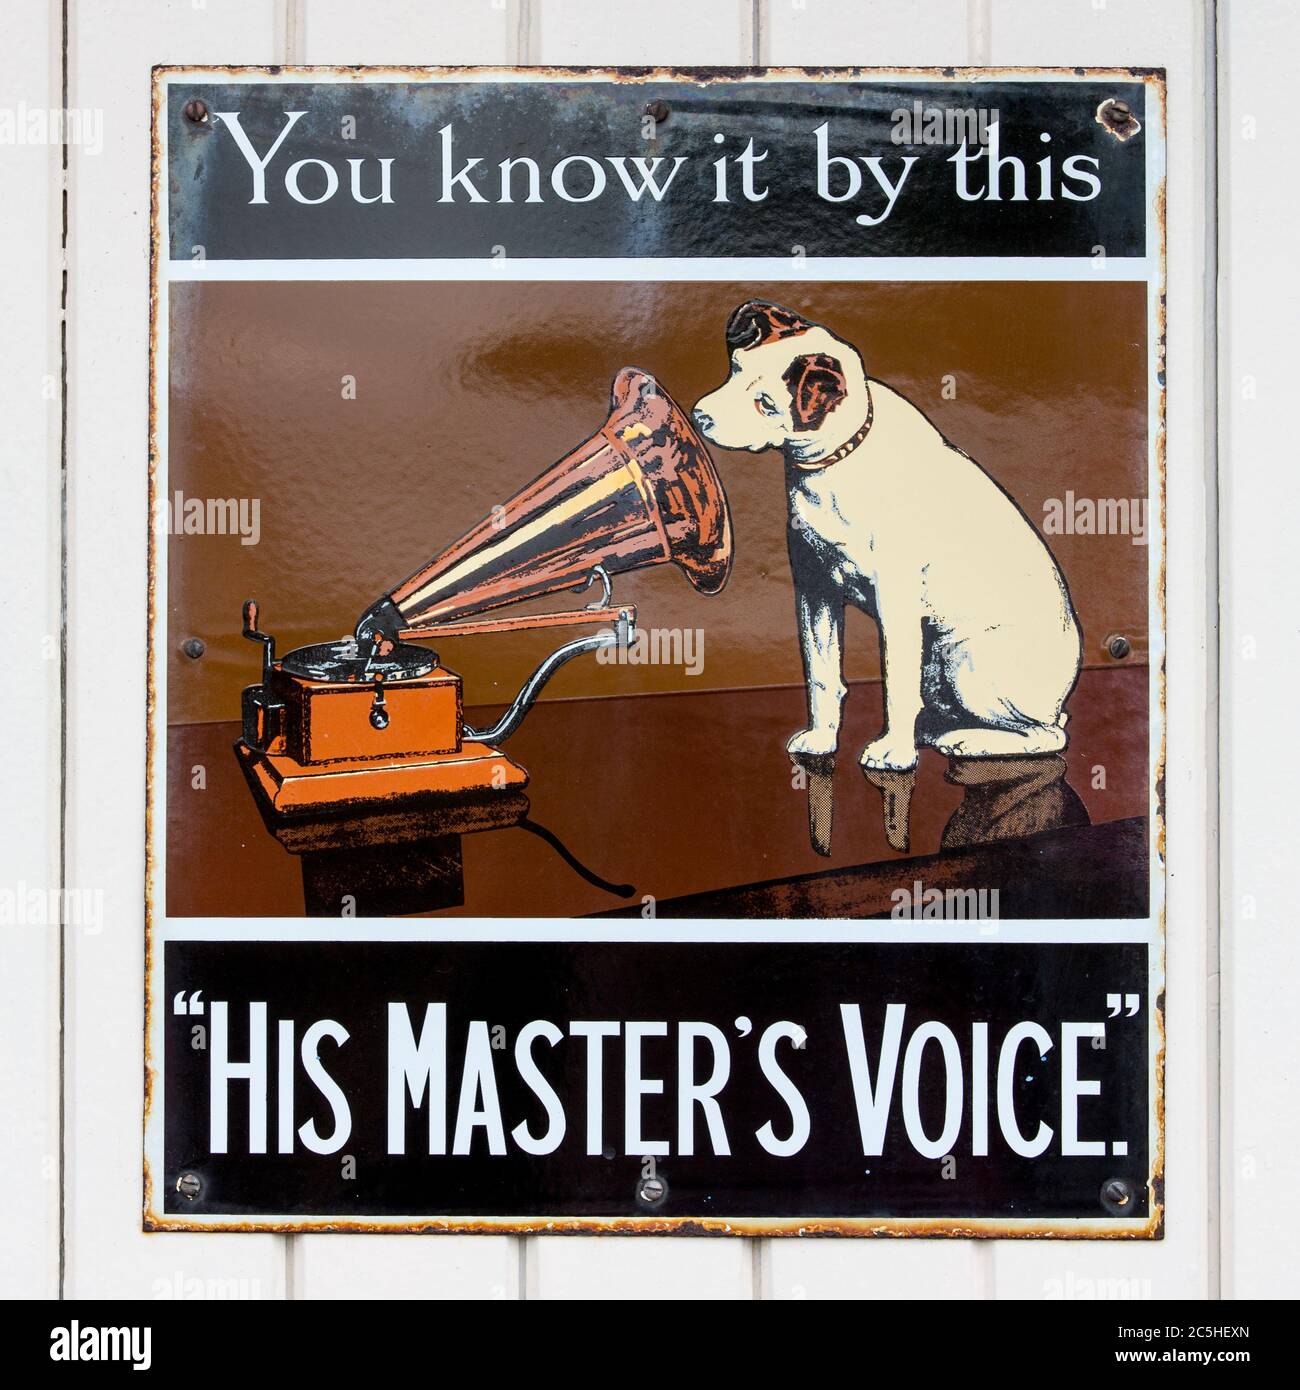 NR SOUTHAMPTON,UK - 25 June 2013: Old style tin advertising board for His Master's Voice displayed on painted wood background. On 25 June 2013 Near So Stock Photo